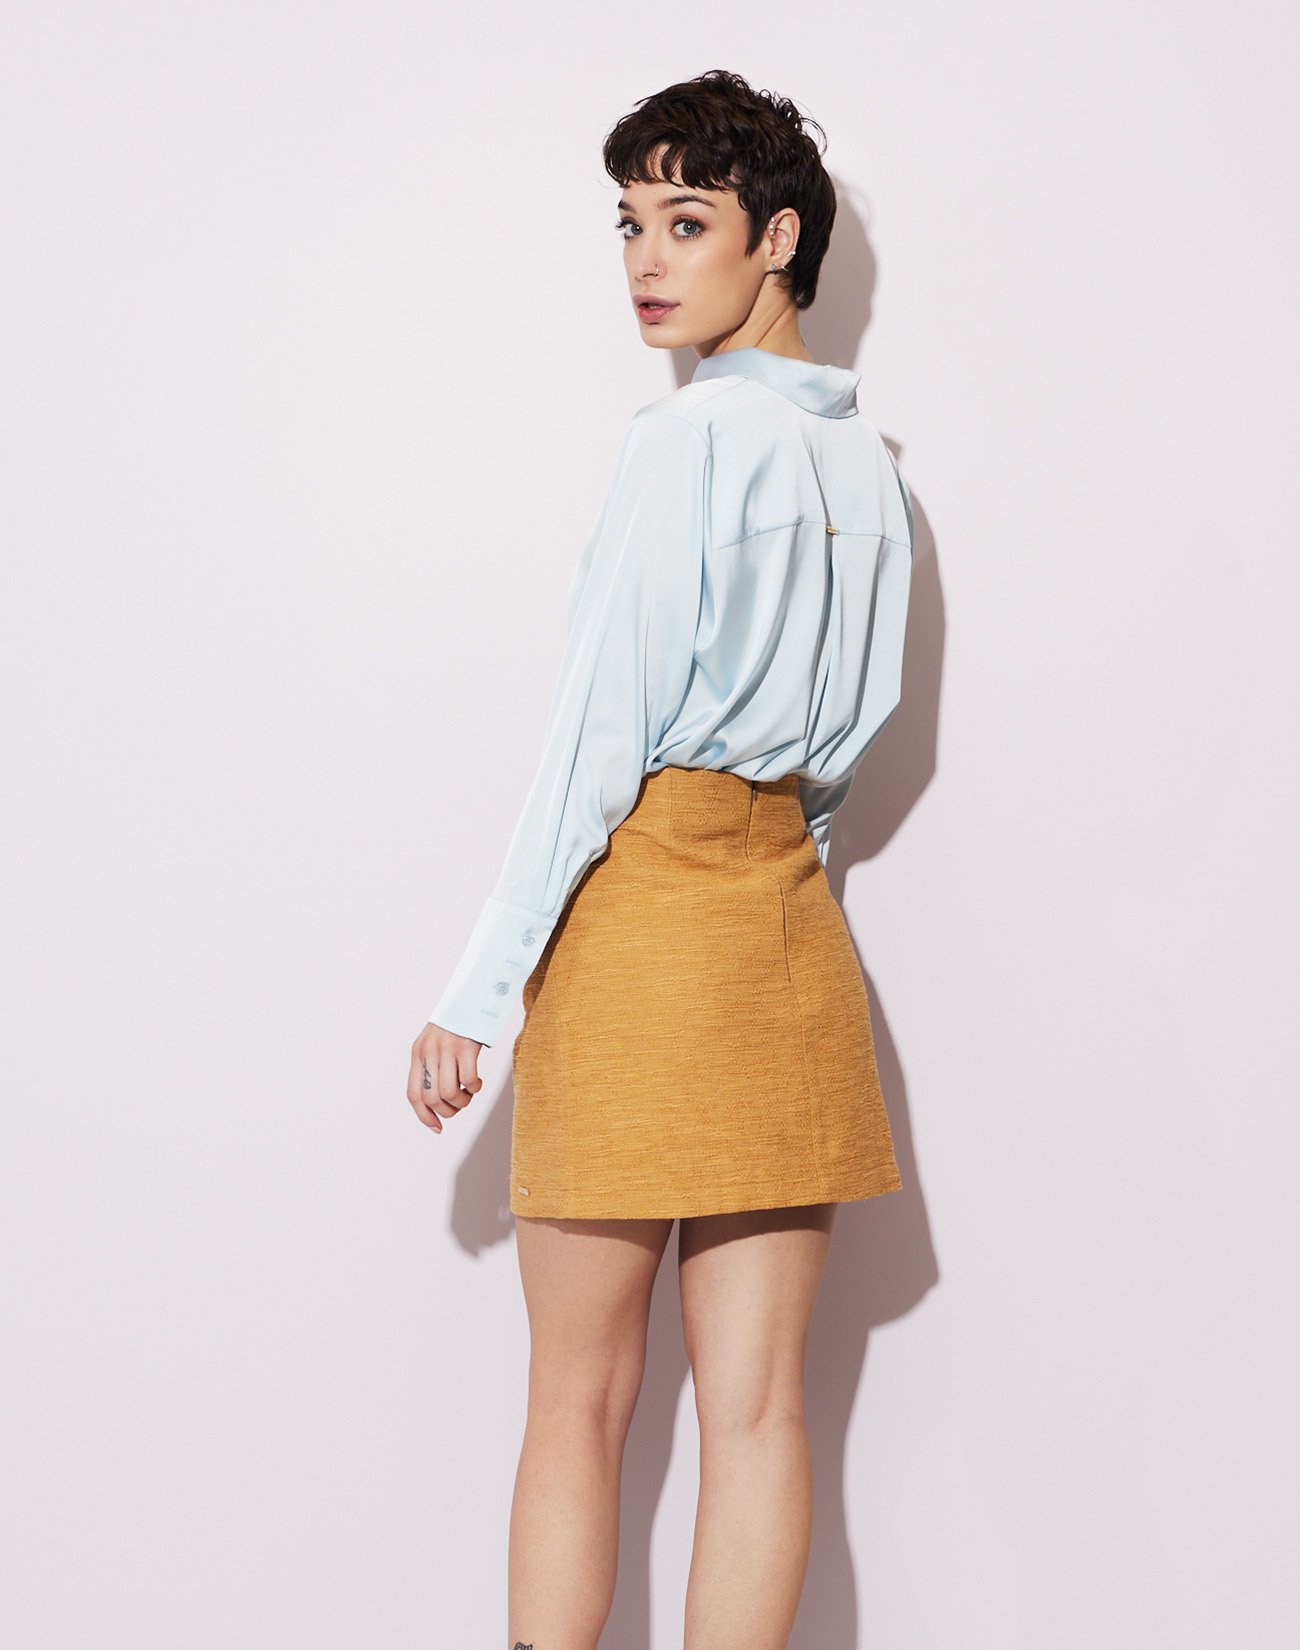 Mini skirt with button detail